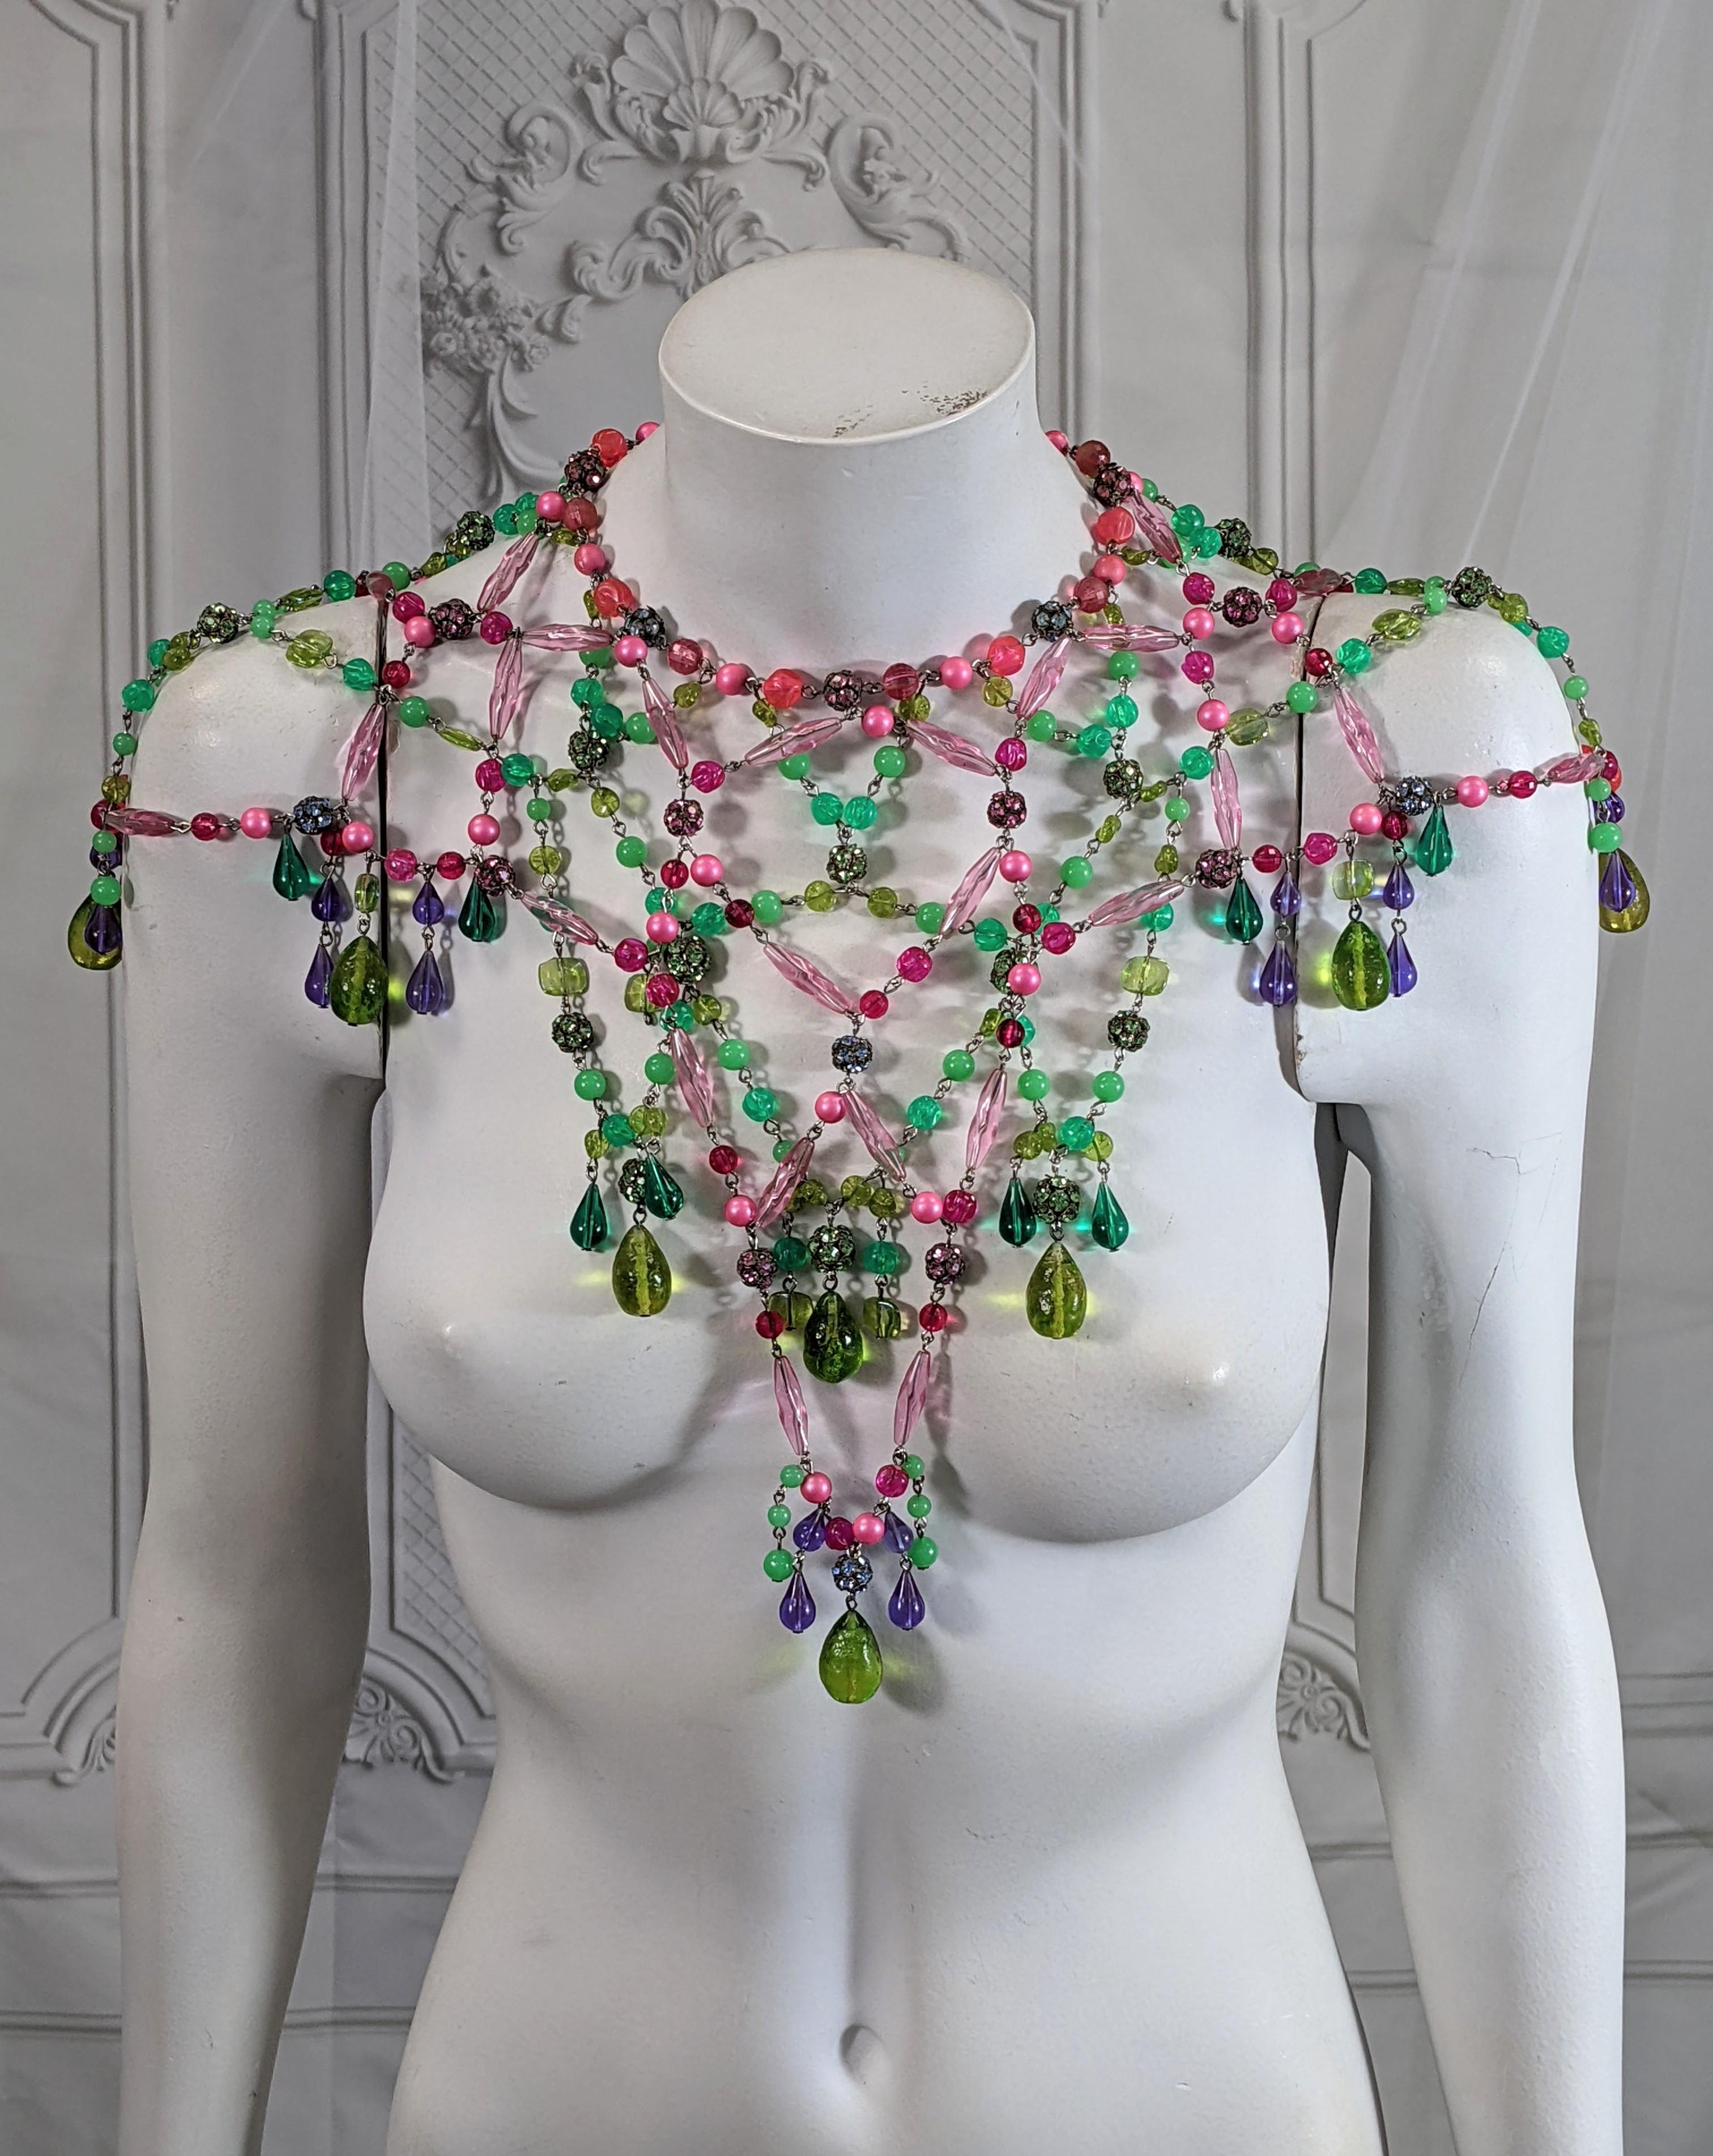 Dramatic bohemian capelet necklace from the 1960's USA. Handmade and composed of multicolored imported glass, resin beads and Swarovski crystal balls which form a capelet over shoulders. Wonderful colorations, perfect over a simple gown. 1960's